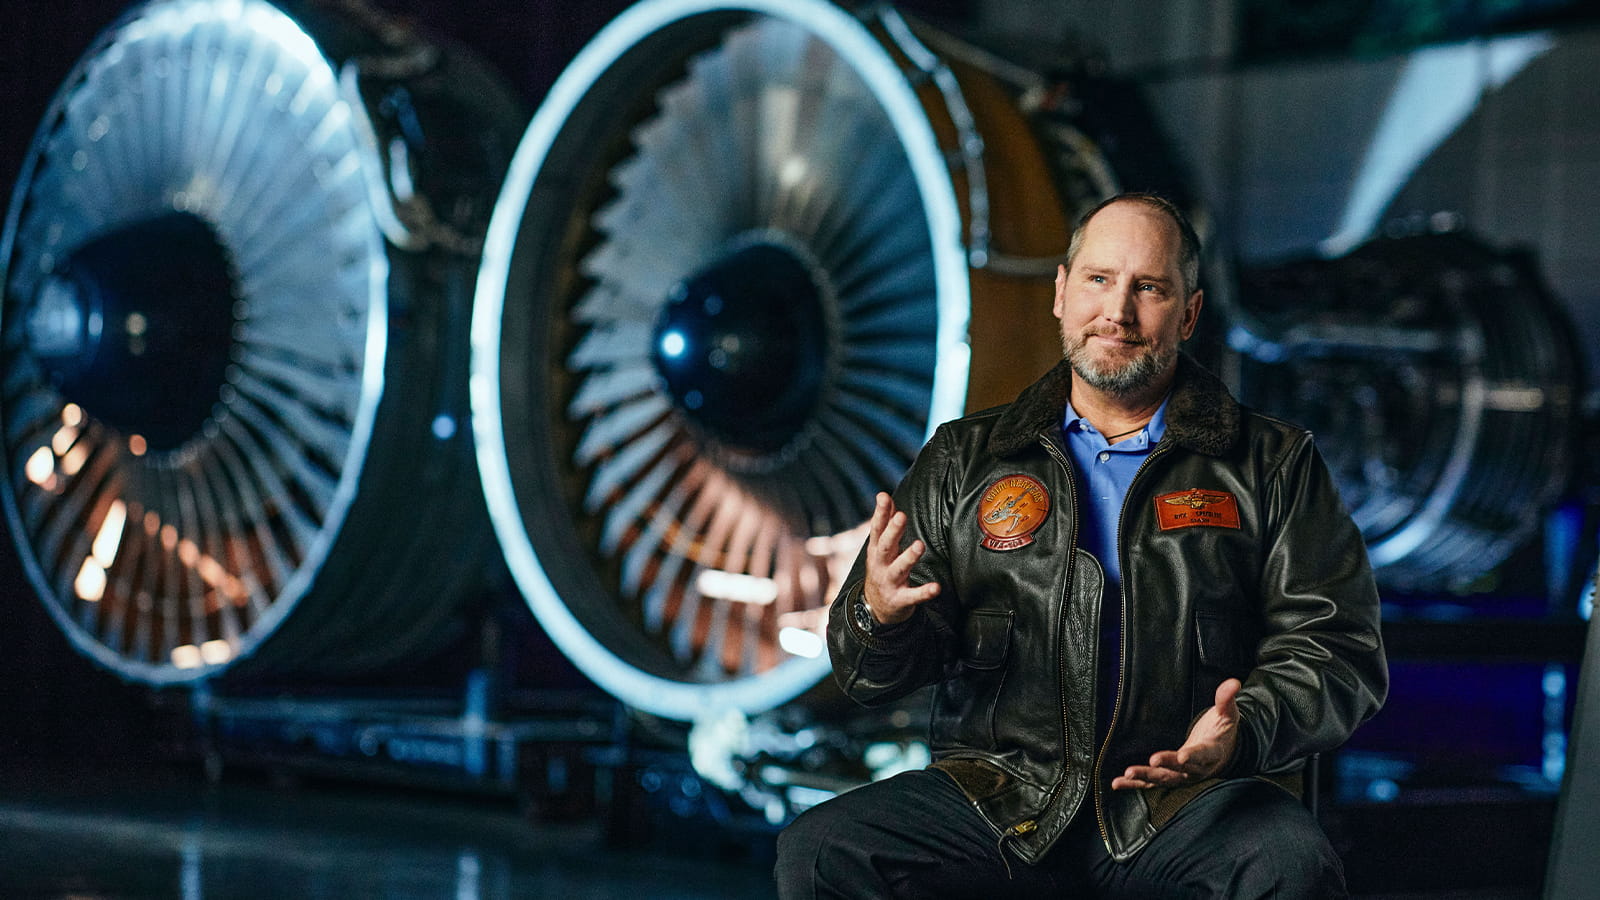 A man in a leather flight jacket gestures in front of two aircraft engines during an interview